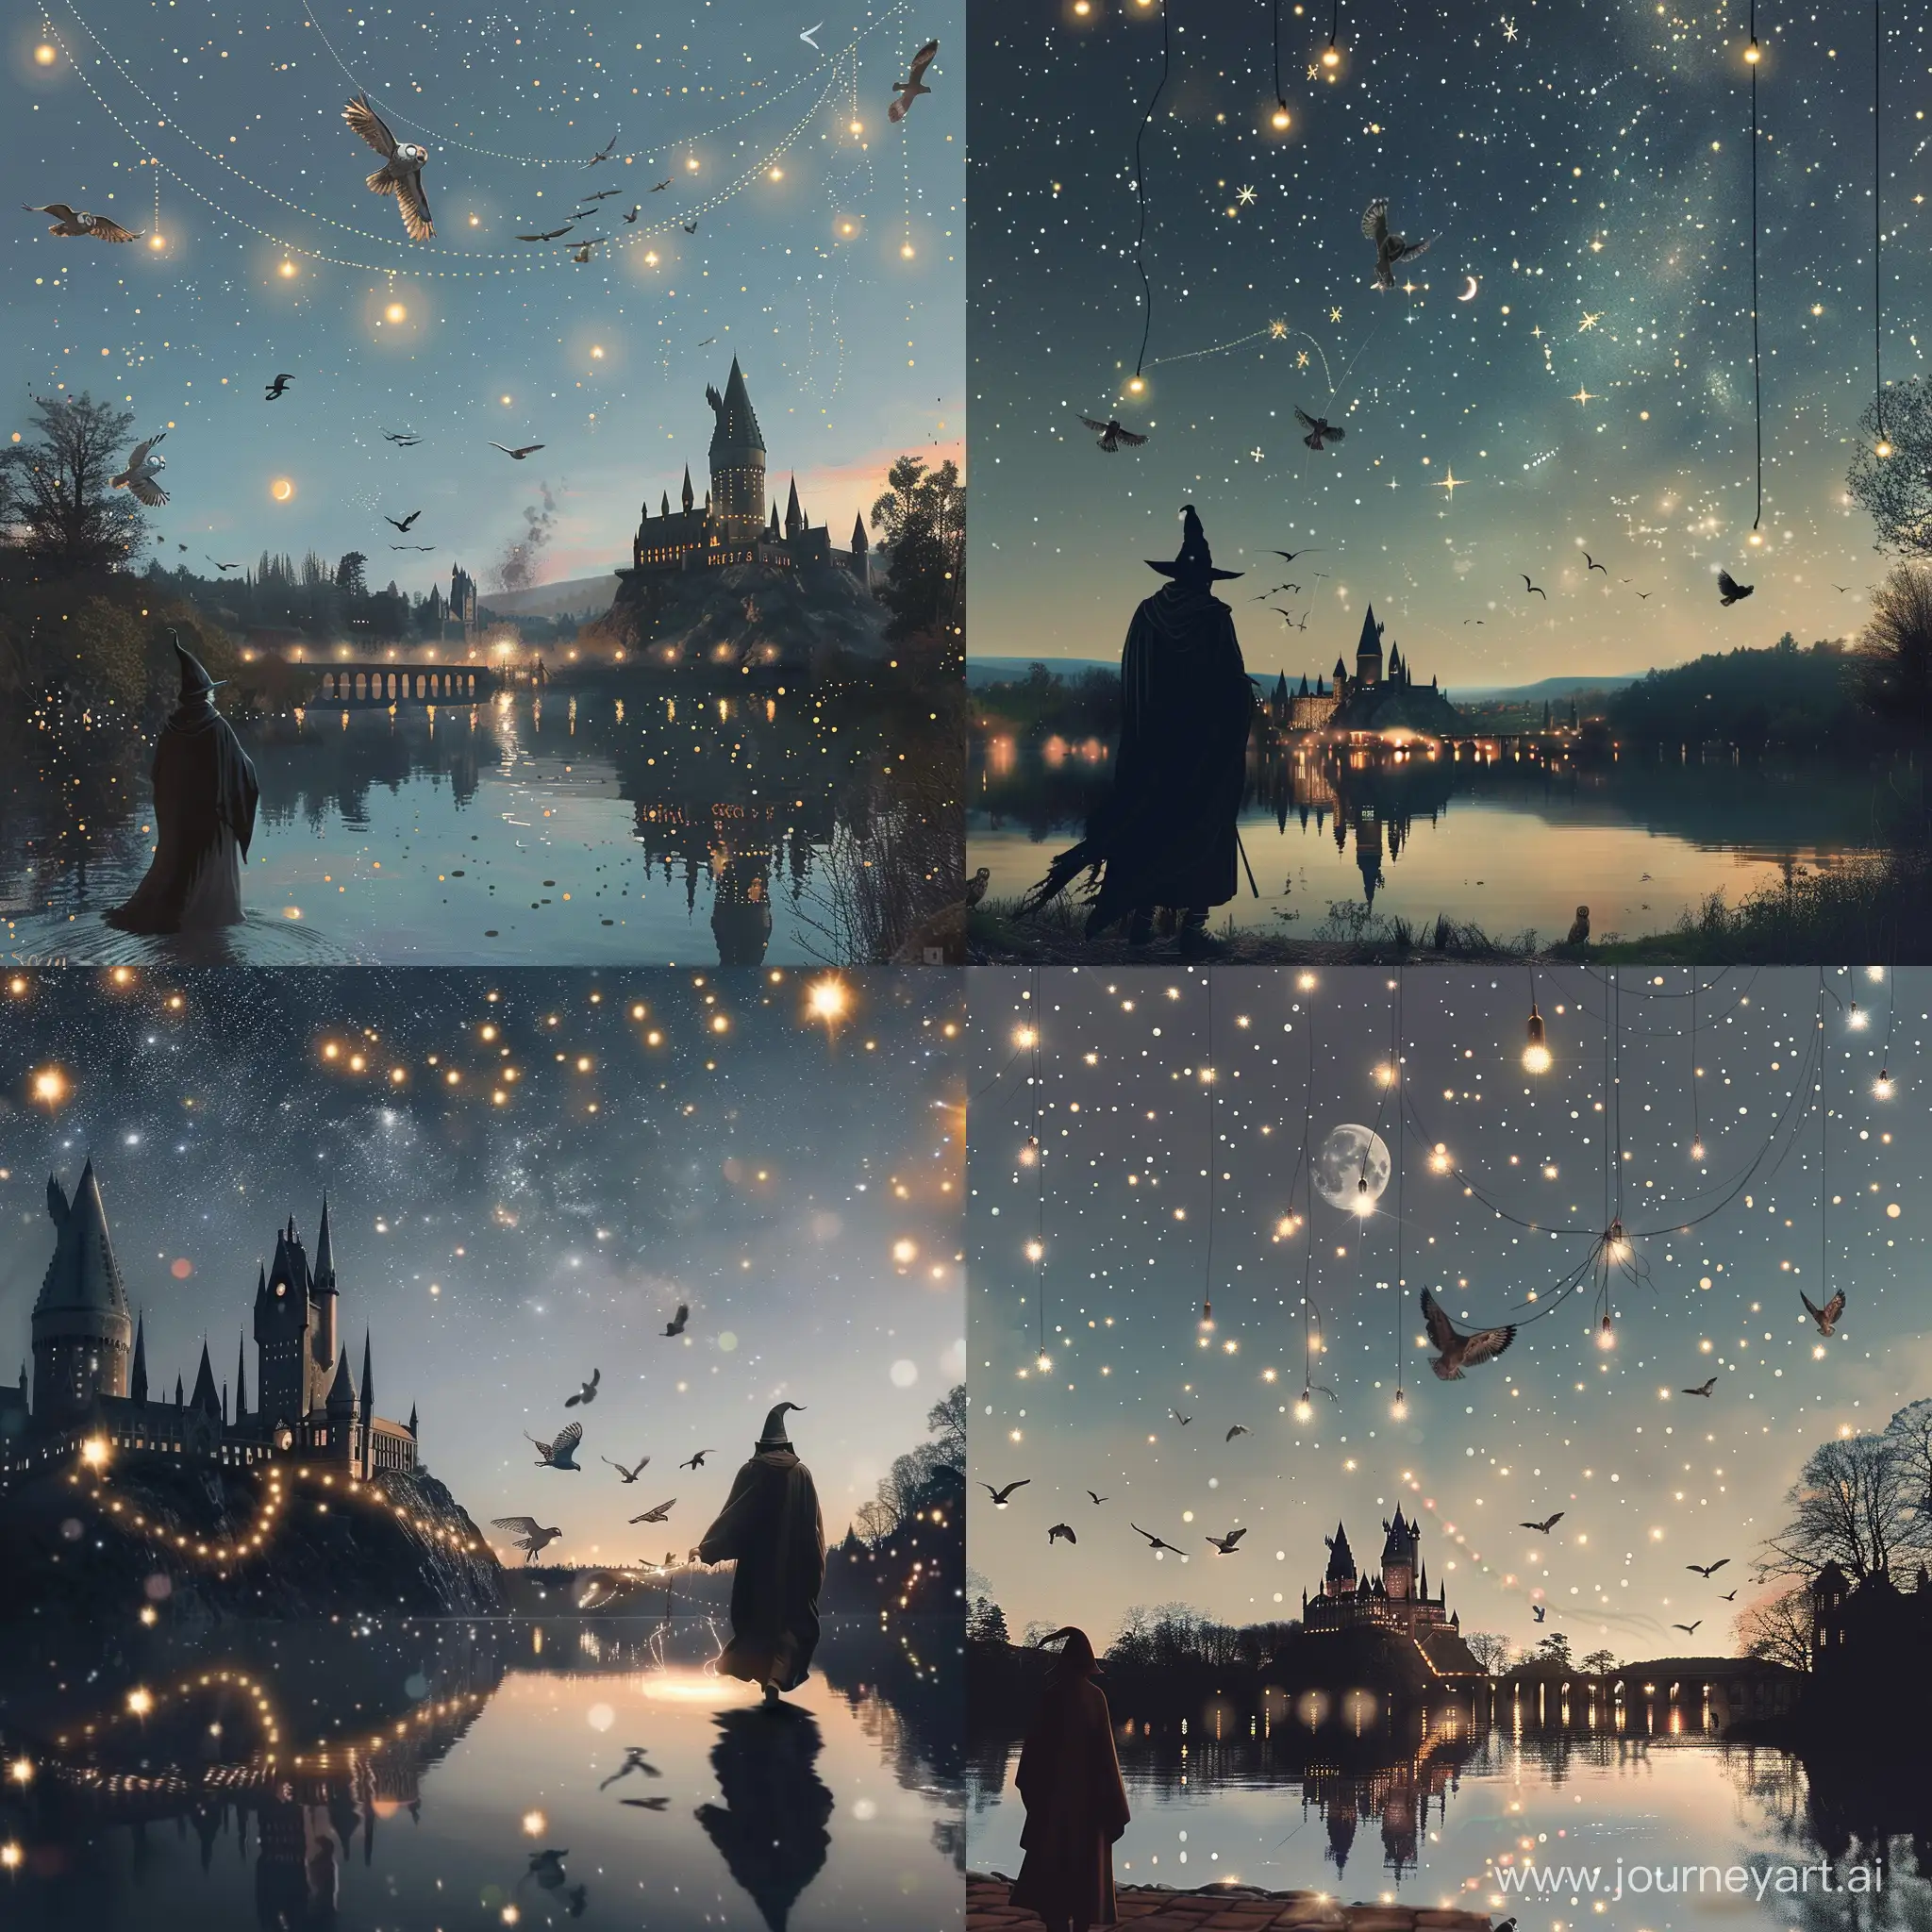 Enchanting-Night-Arrival-at-Hogwarts-with-Wizard-Owls-and-Castle-Lights